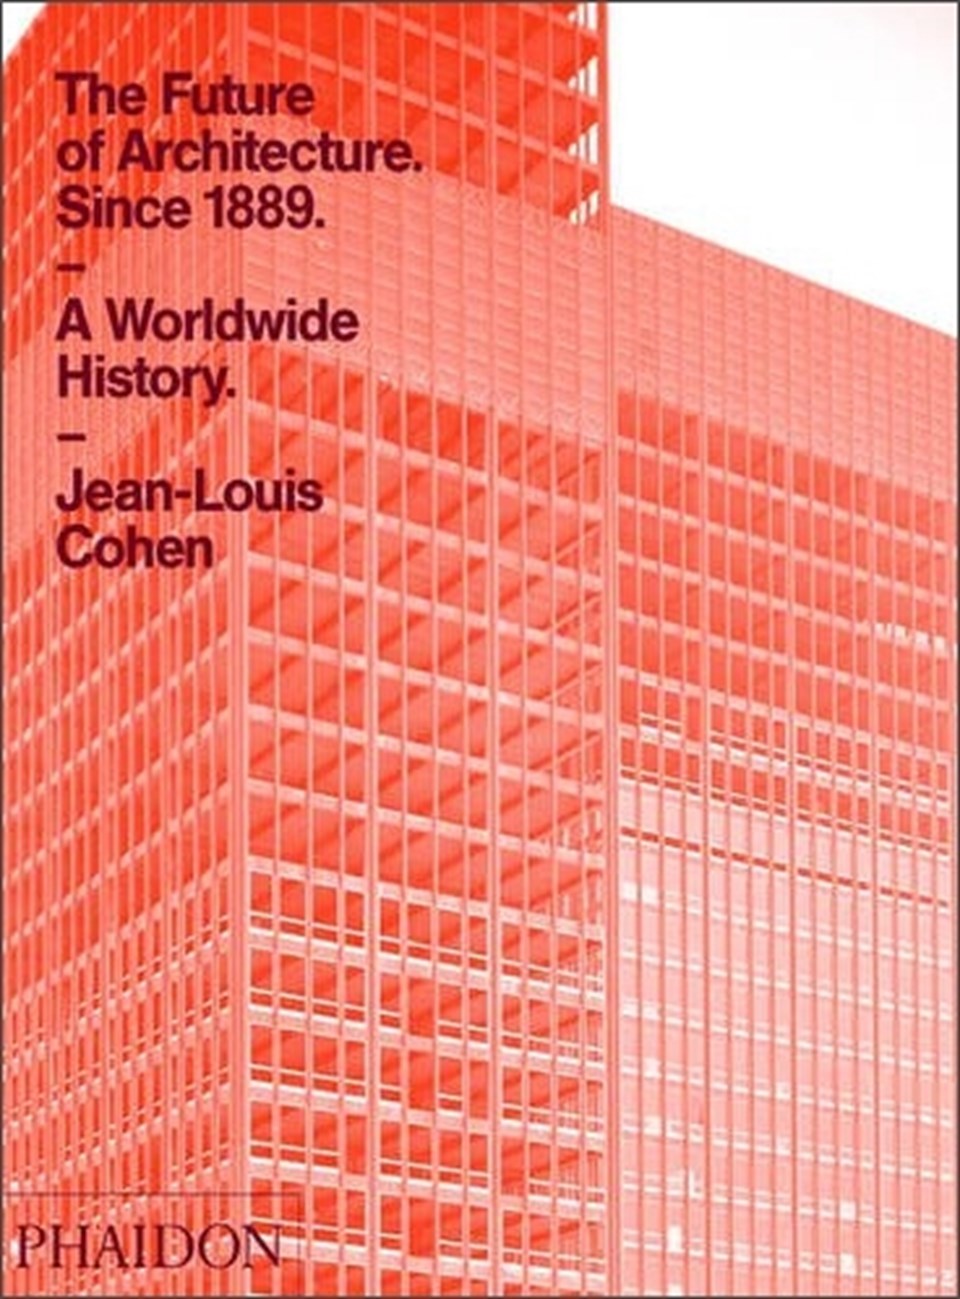 The Future of Architecture - Since 1889